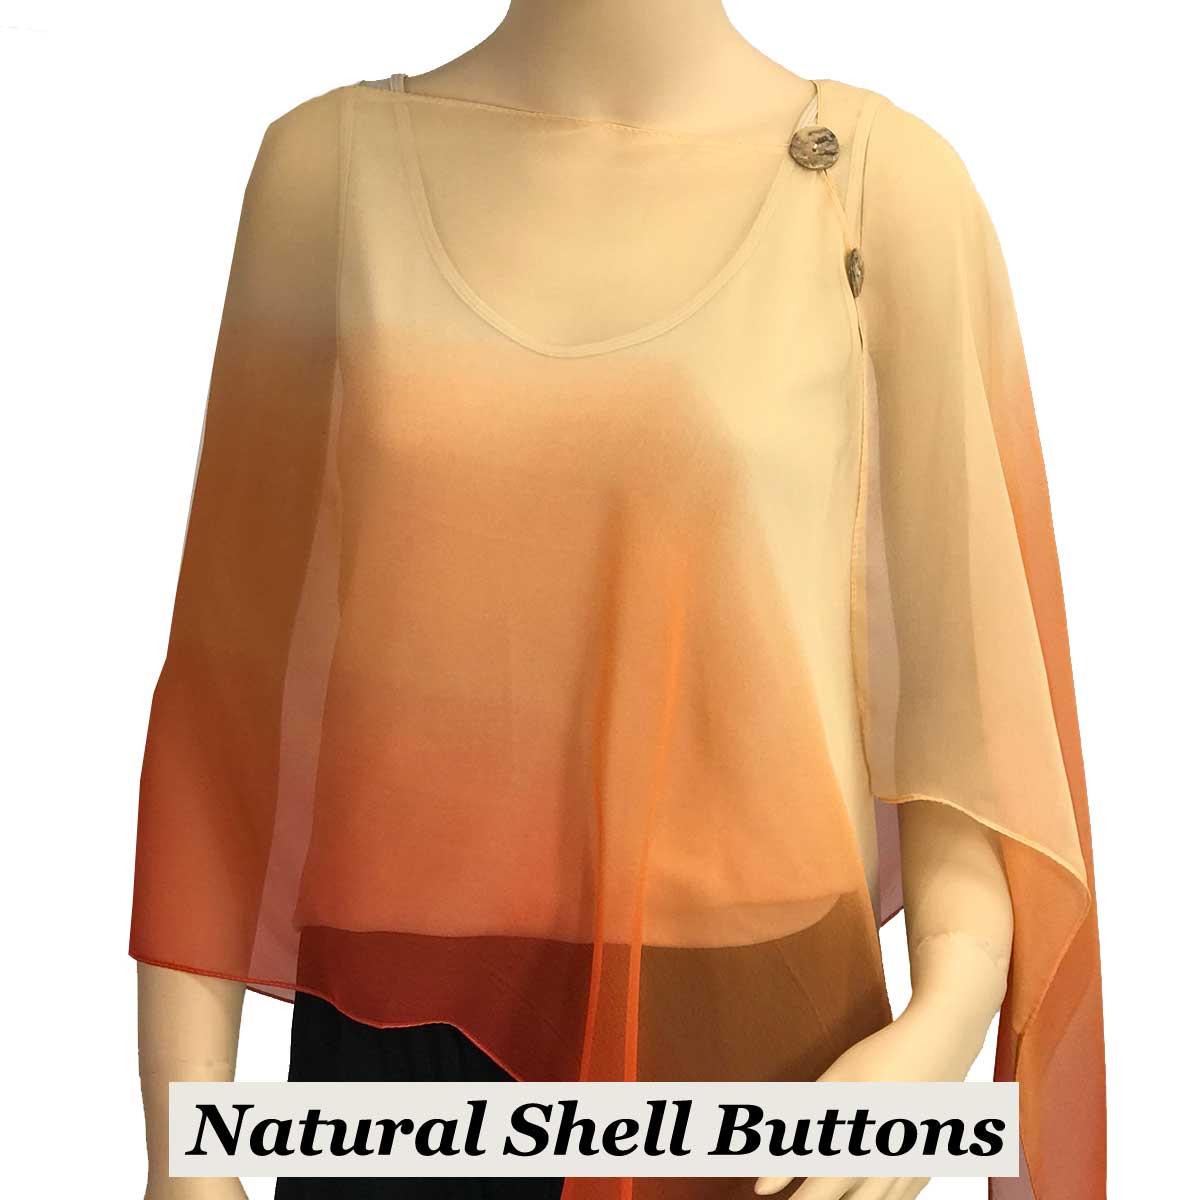 SBS-106OR Shell Buttons<br> Tri-Color Beige-Peach-Orange